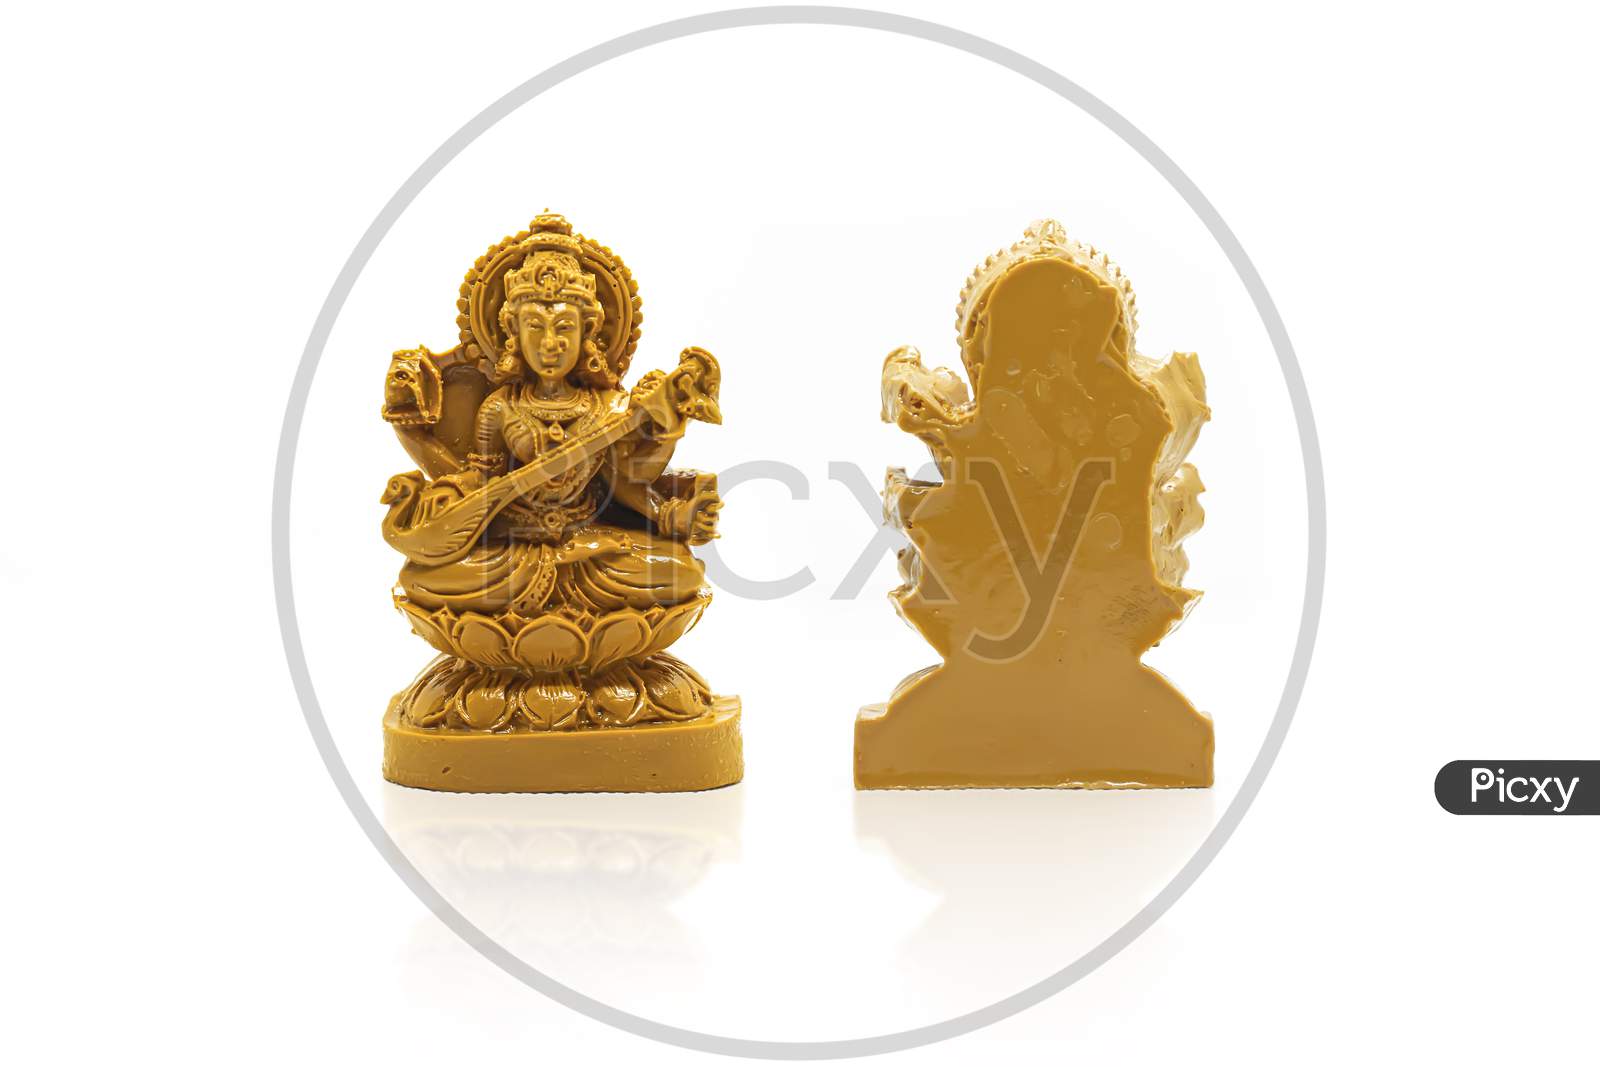 Brown Wood Carved Saraswati Statue In Front And Back Isolated In White With Reflection